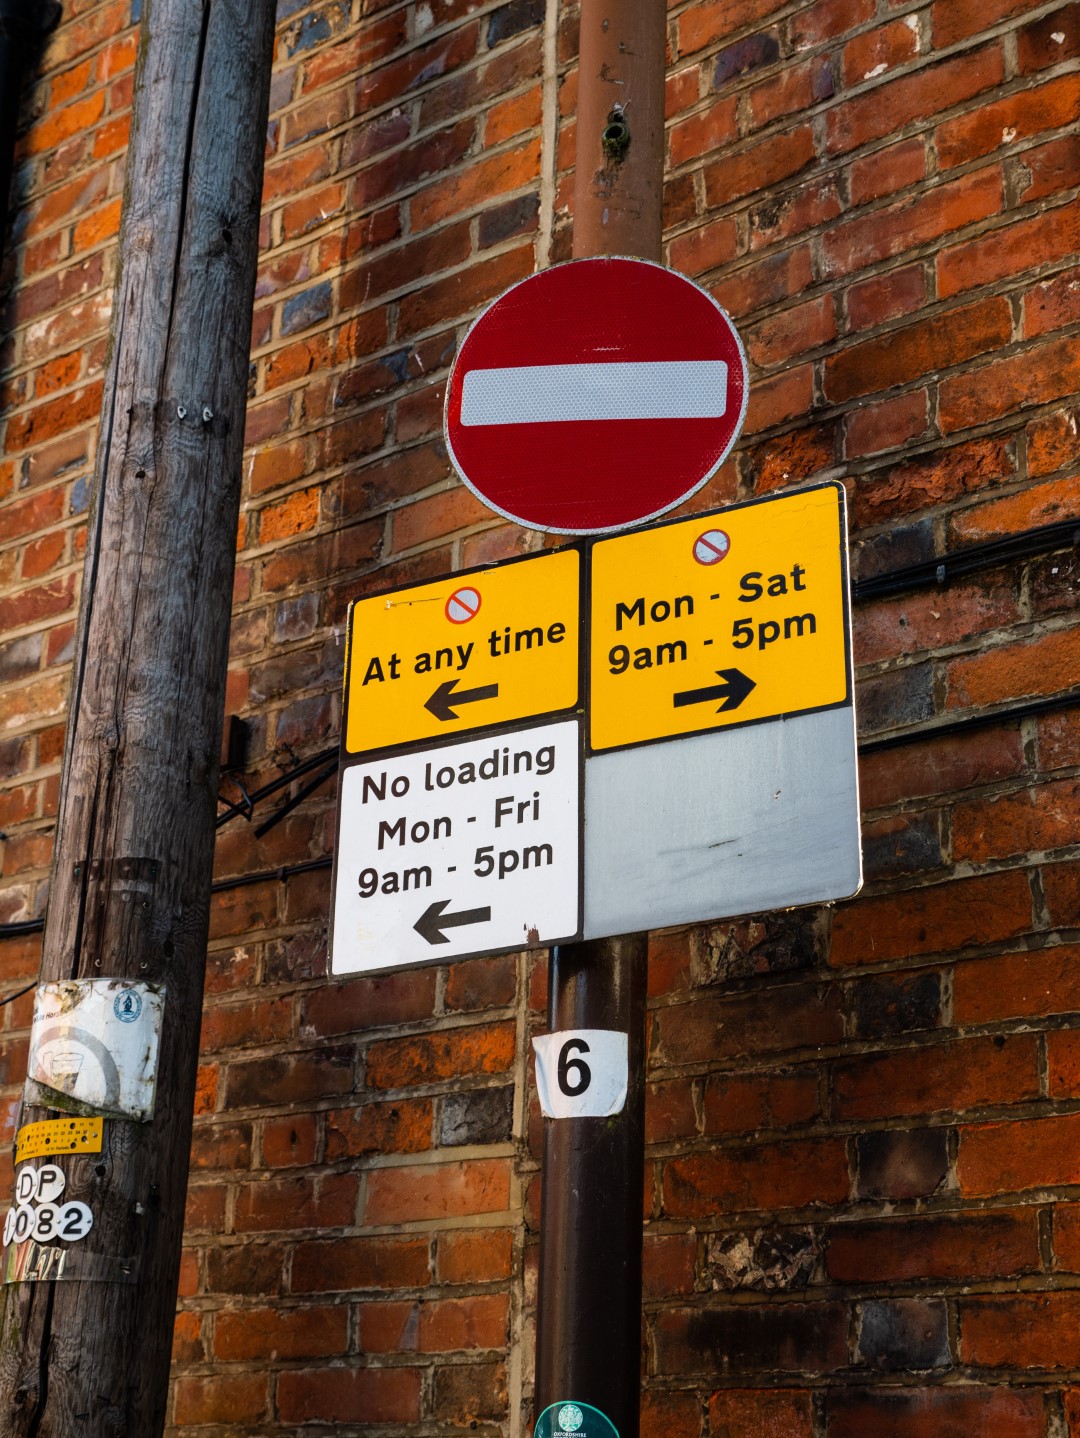 Various parking restriction signs attached to a metal pole in front of a brick wall.